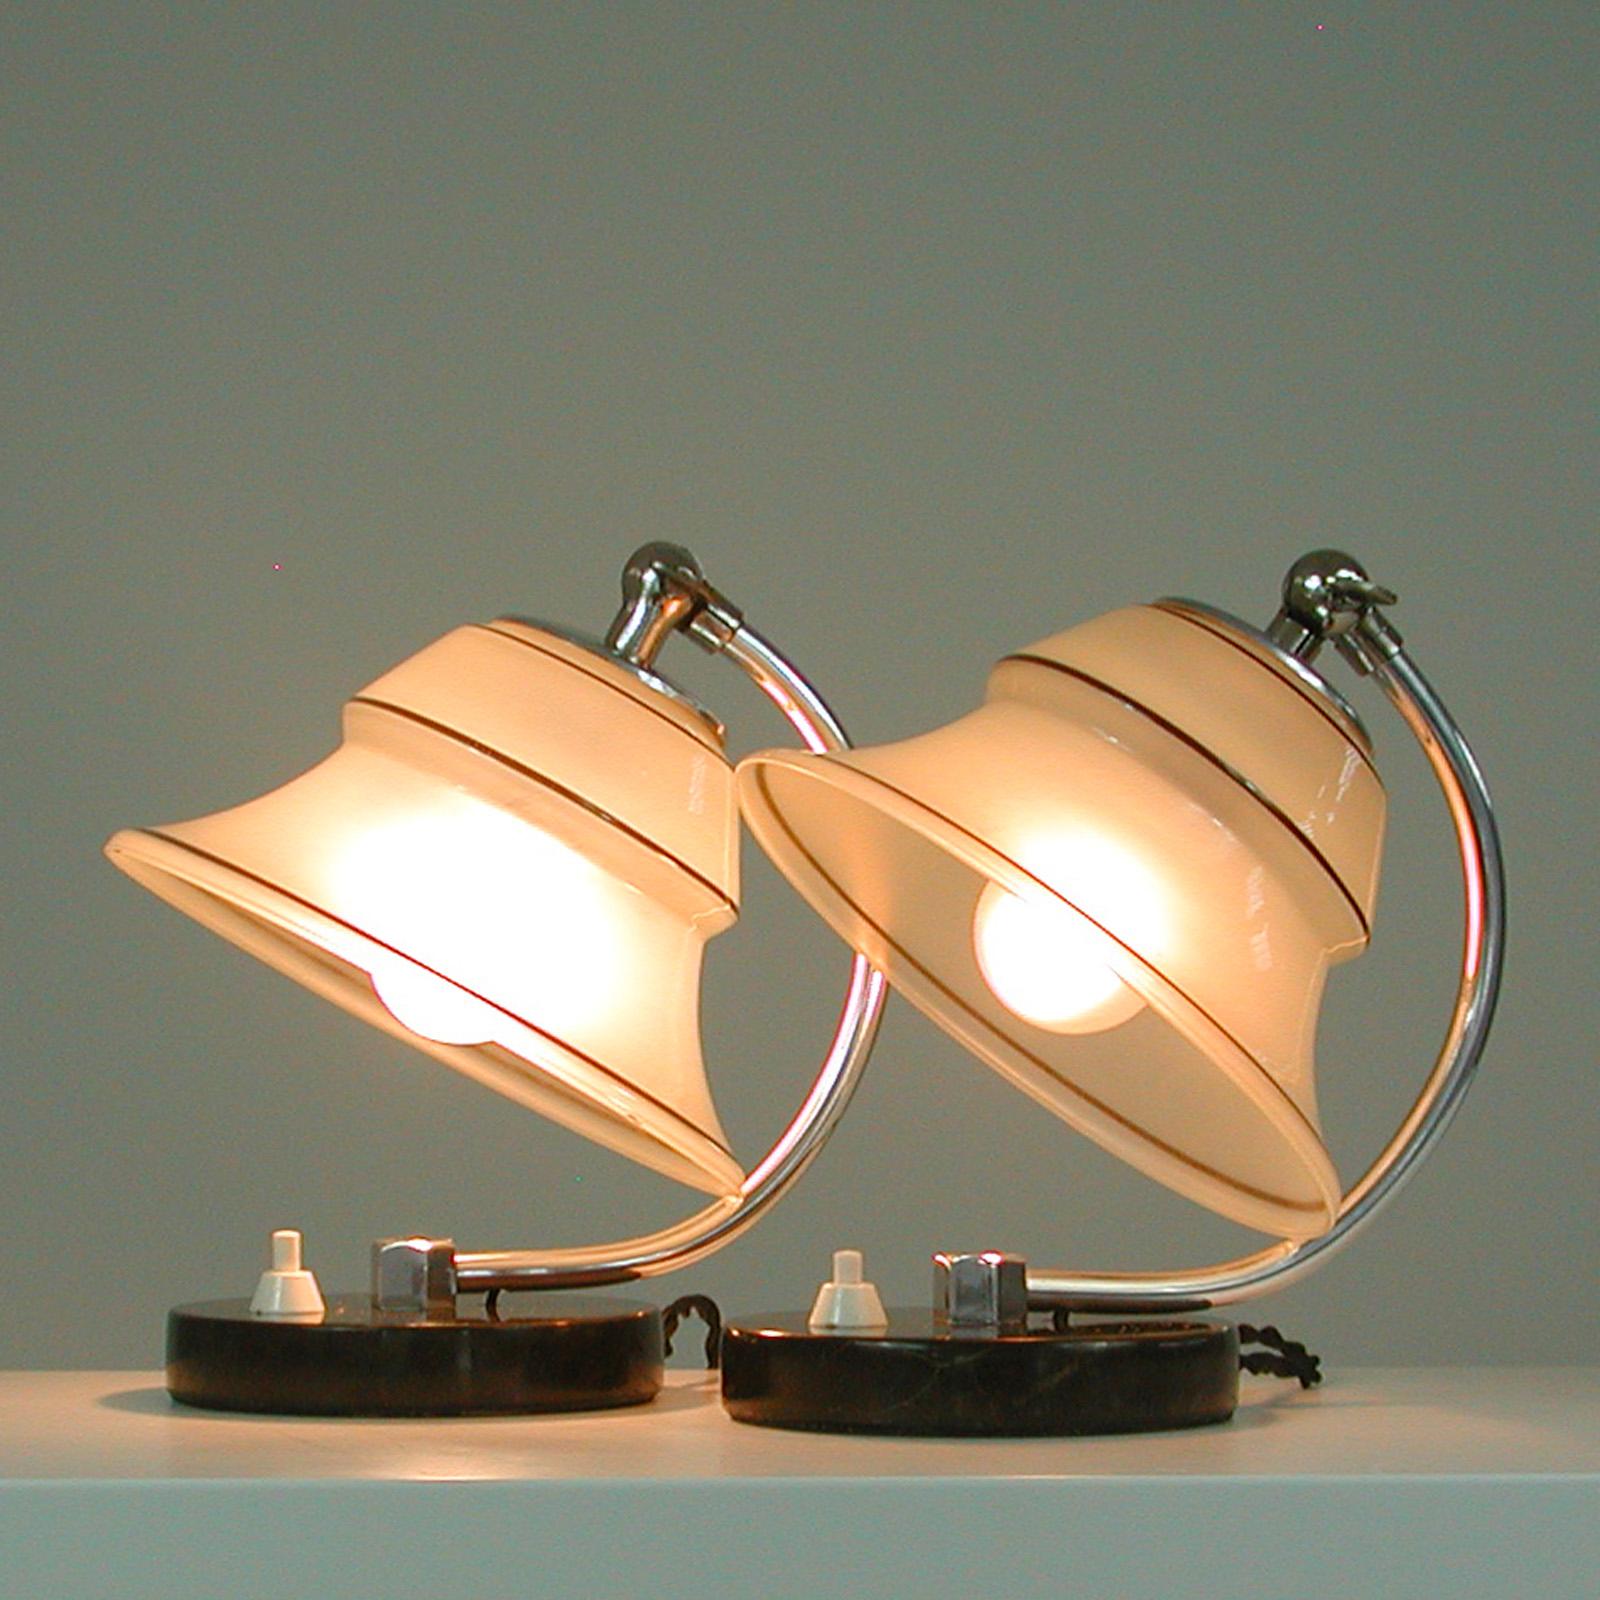 German Art Deco Enameled Satin Glass, Marble and Aluminum Table Lamps, 1930s For Sale 14